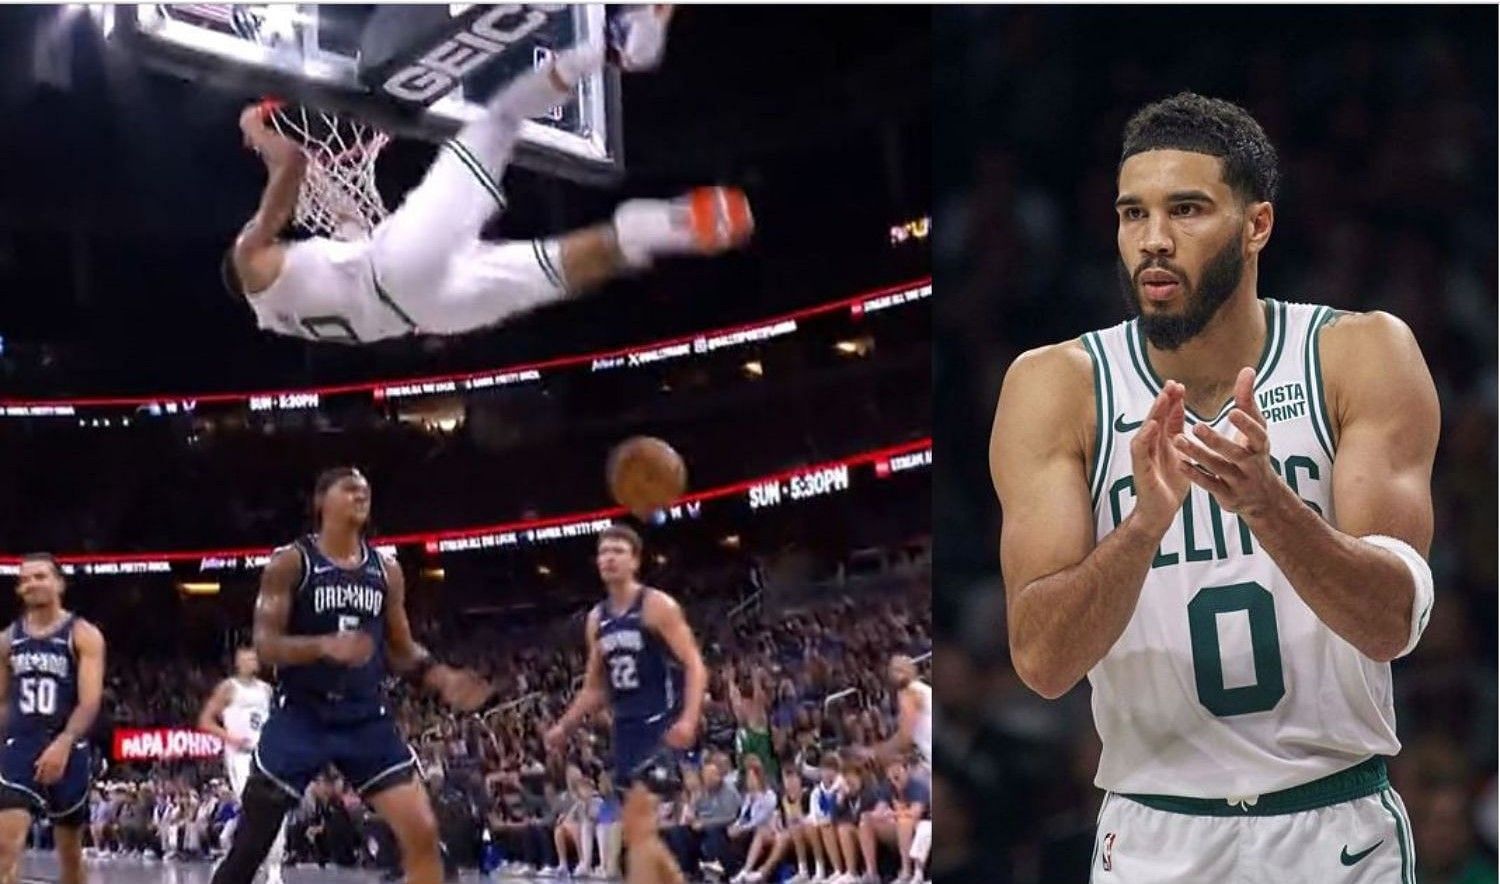 Boston Celtics star Jayson Tatum was baffled for the technical foul called on him for hanging on the rim in their game on Friday.